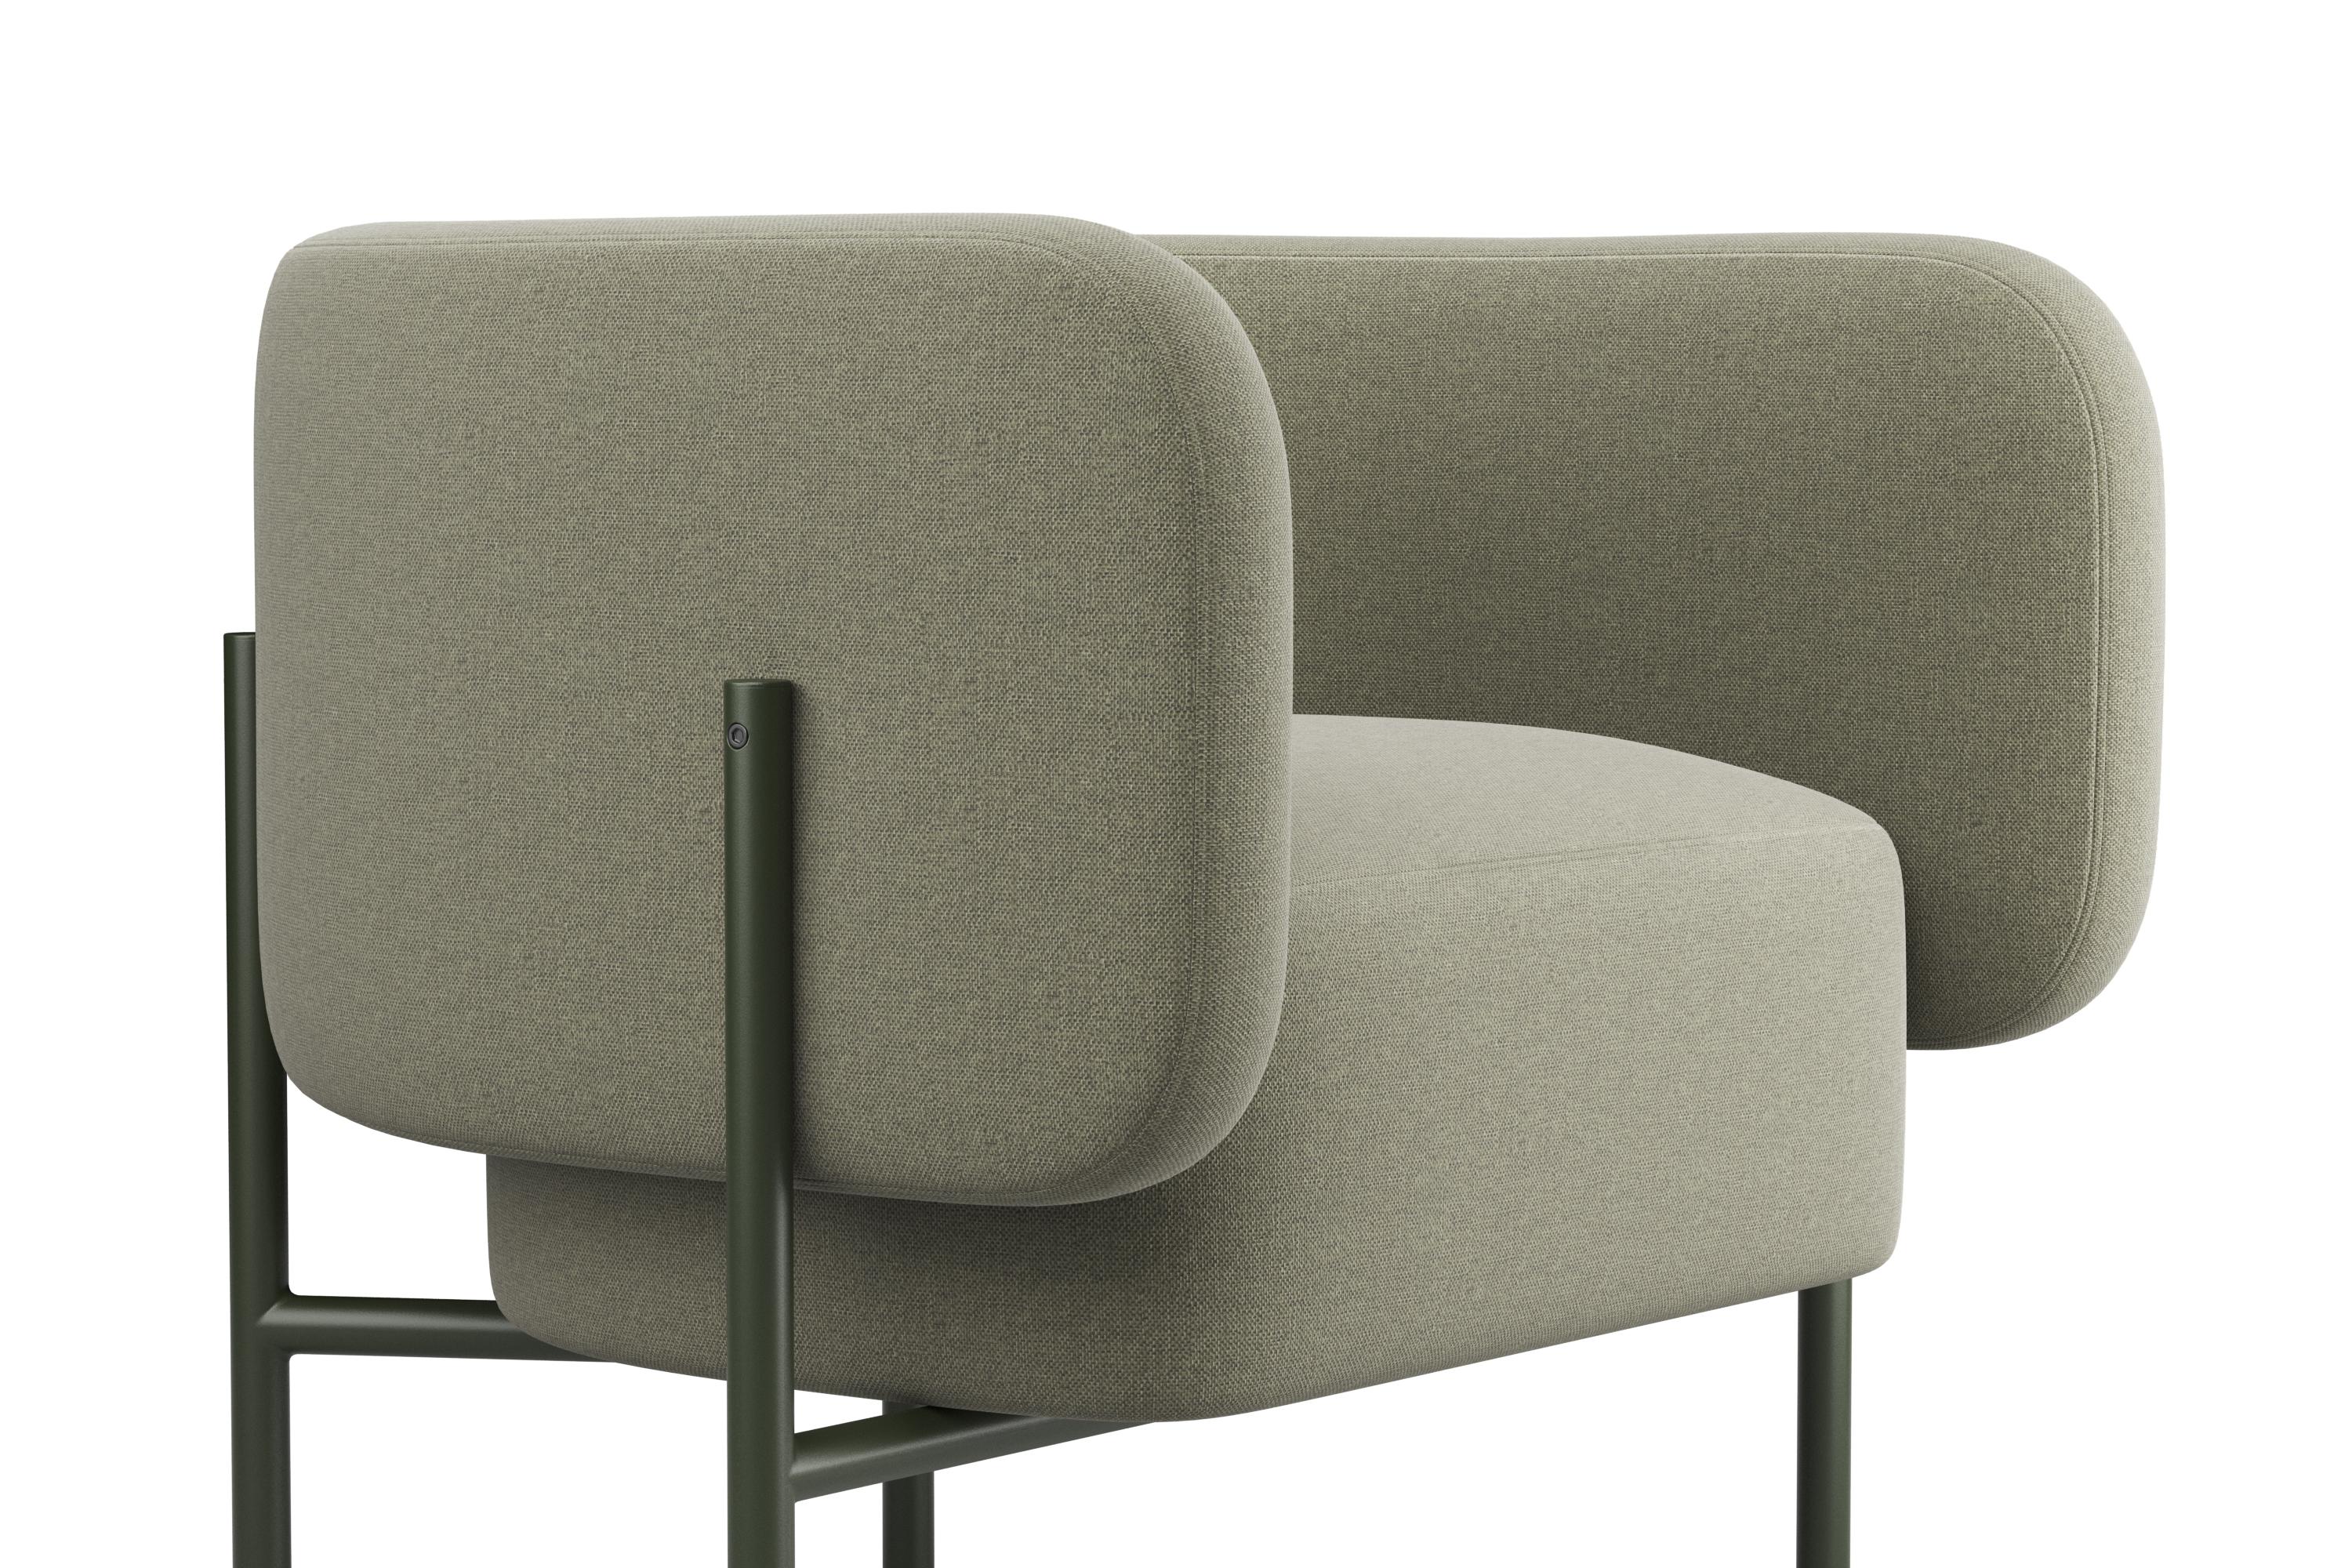 The Abrazo Armchair, translating to 